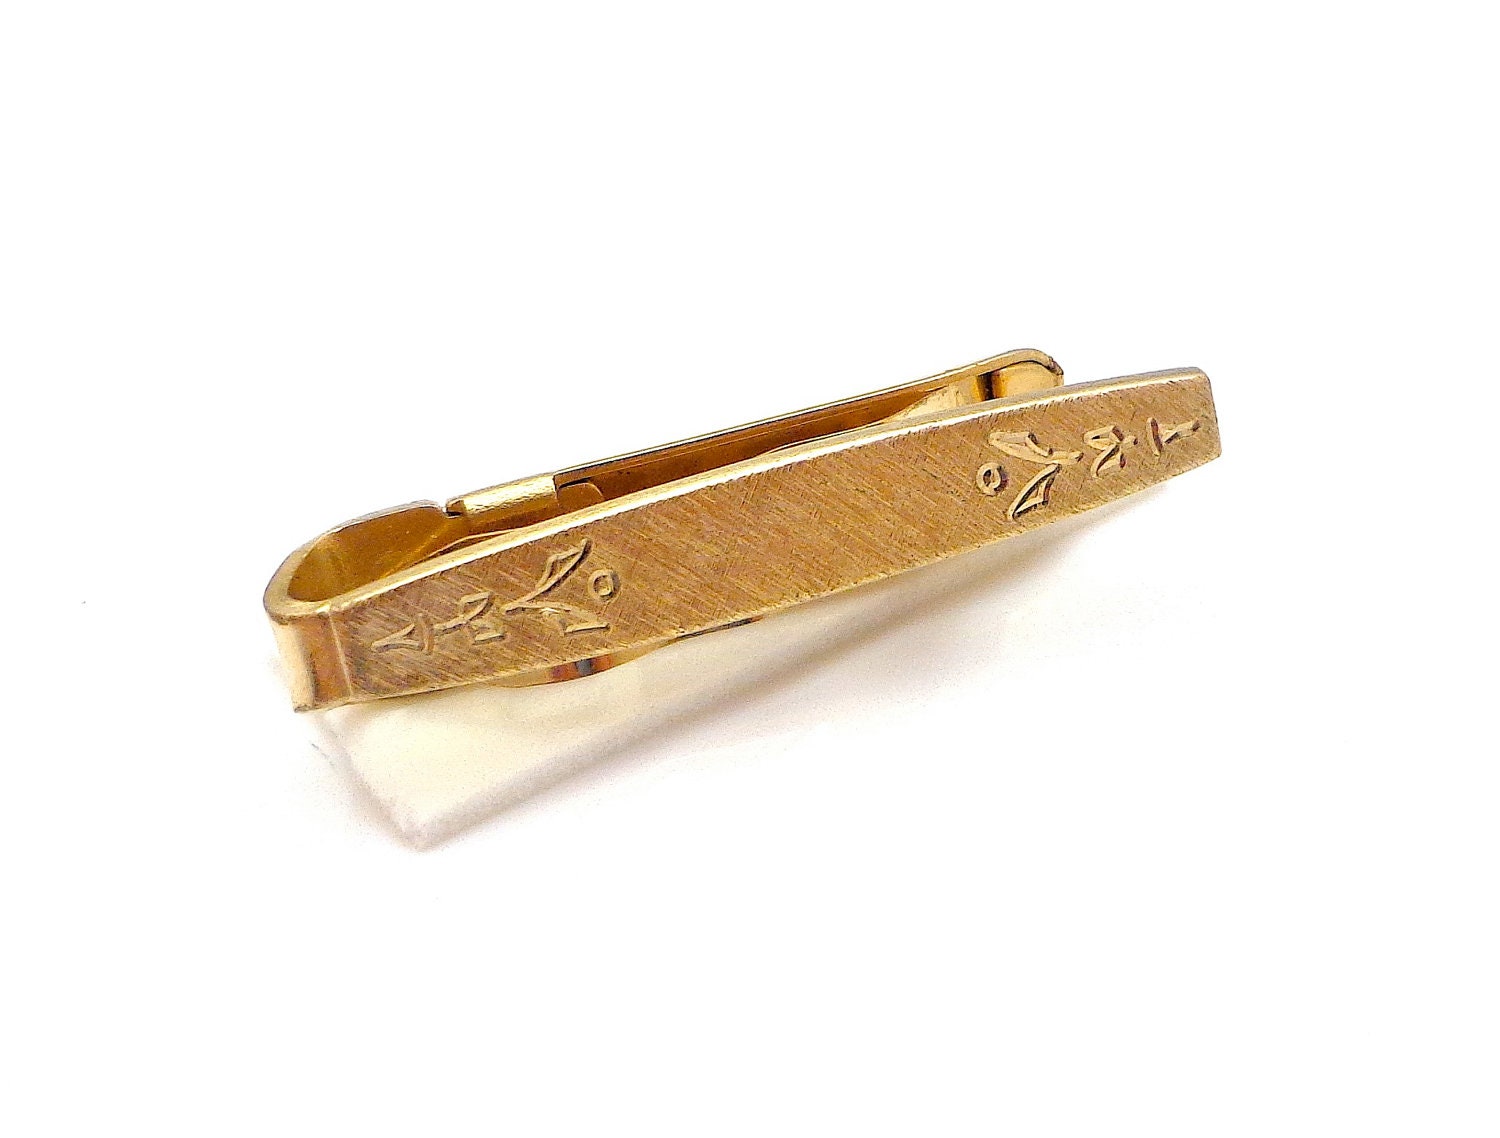 Vintage 1950s Gold Tie Clip Stocking Stuffers